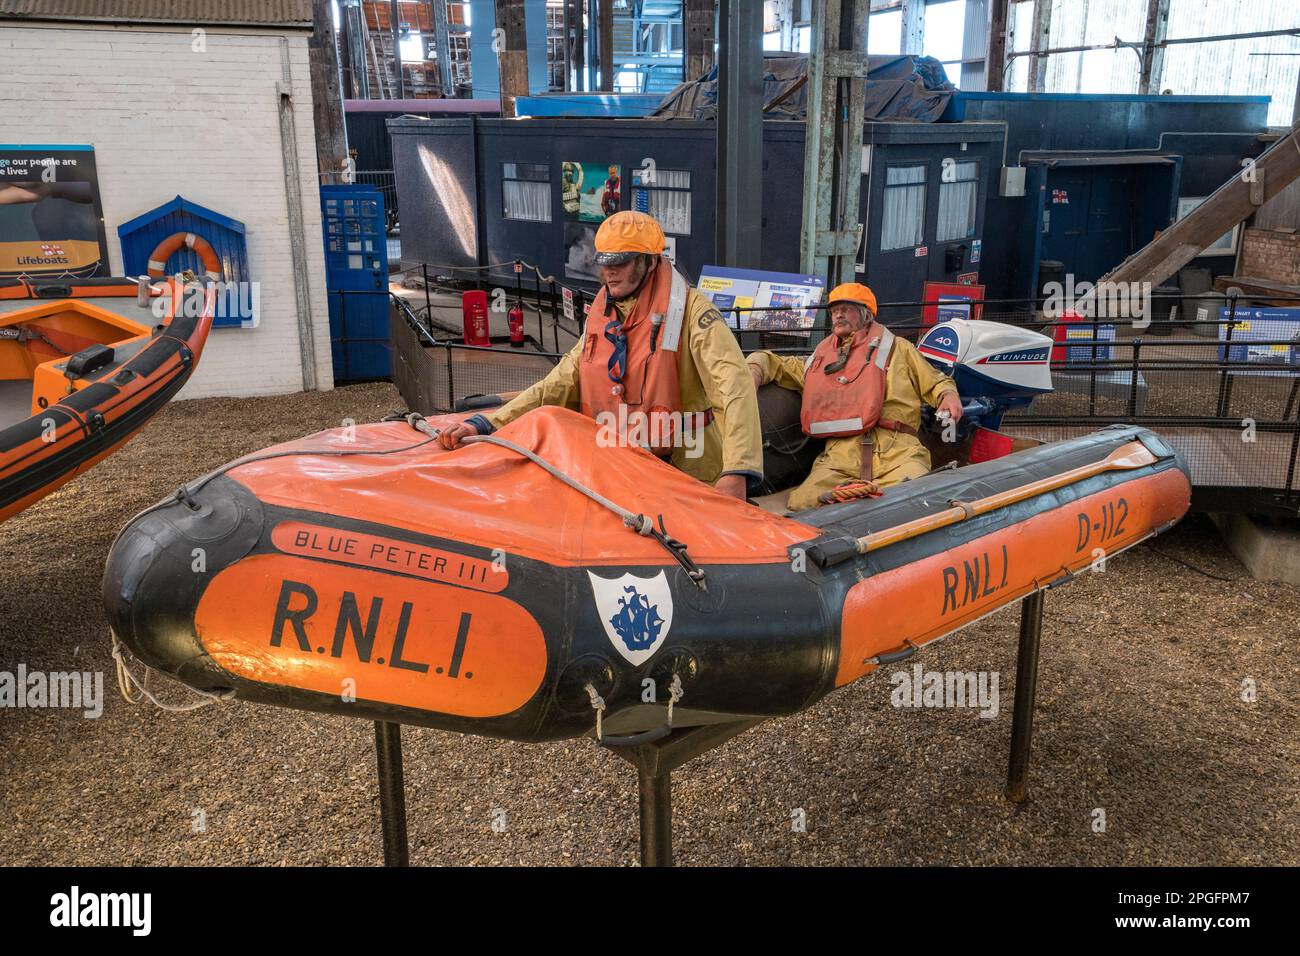 The Blue Peter III liftboat (D-619) in the RNLI Historic Lifeboat Collection, Historic Dockyard Chatham, Kent, UK. Stock Photo